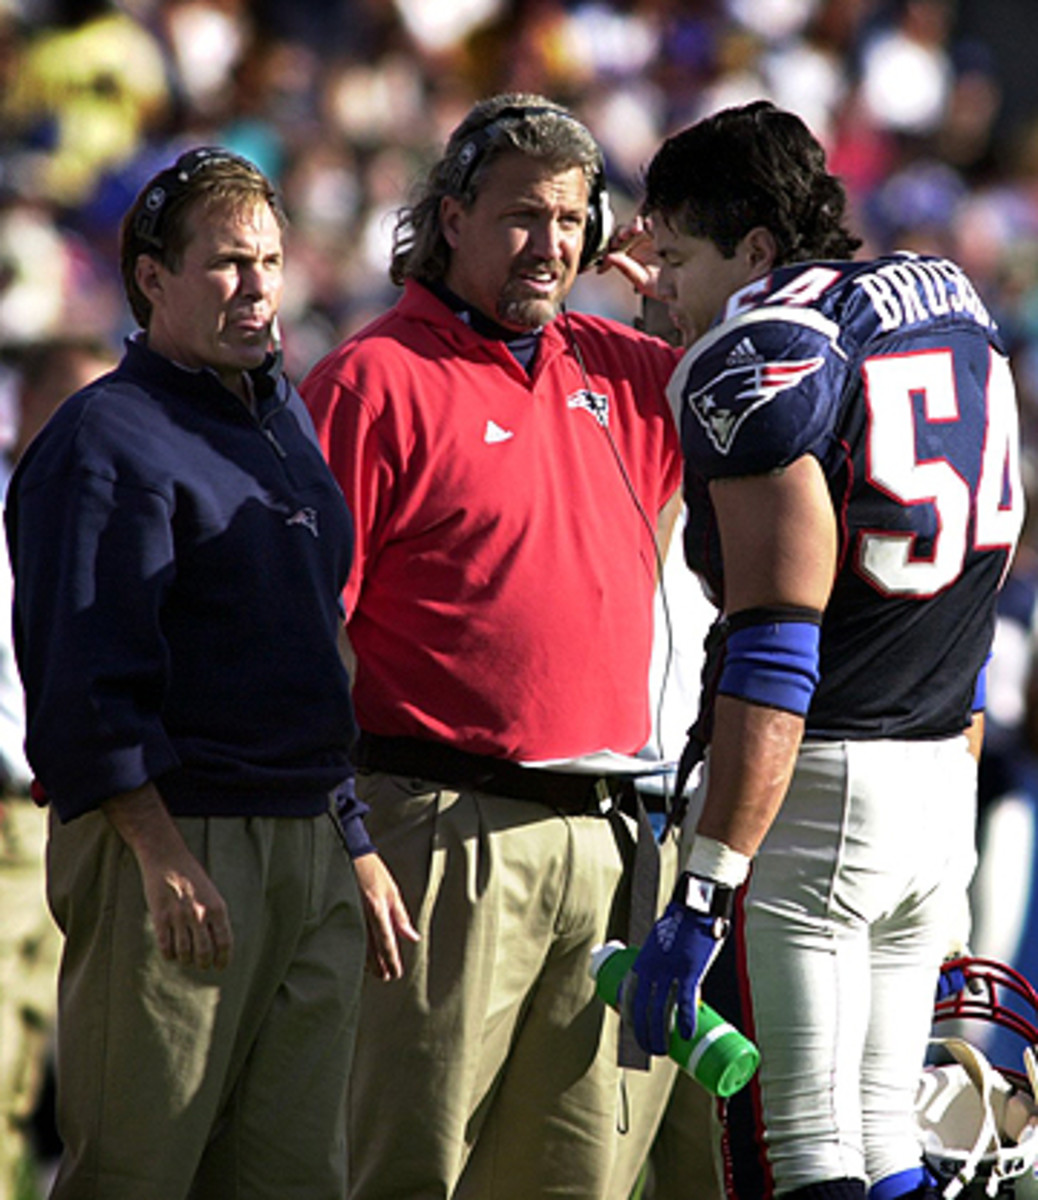 Rob worked with Belichick in 2000-03 as the Patriots linebackers coach.